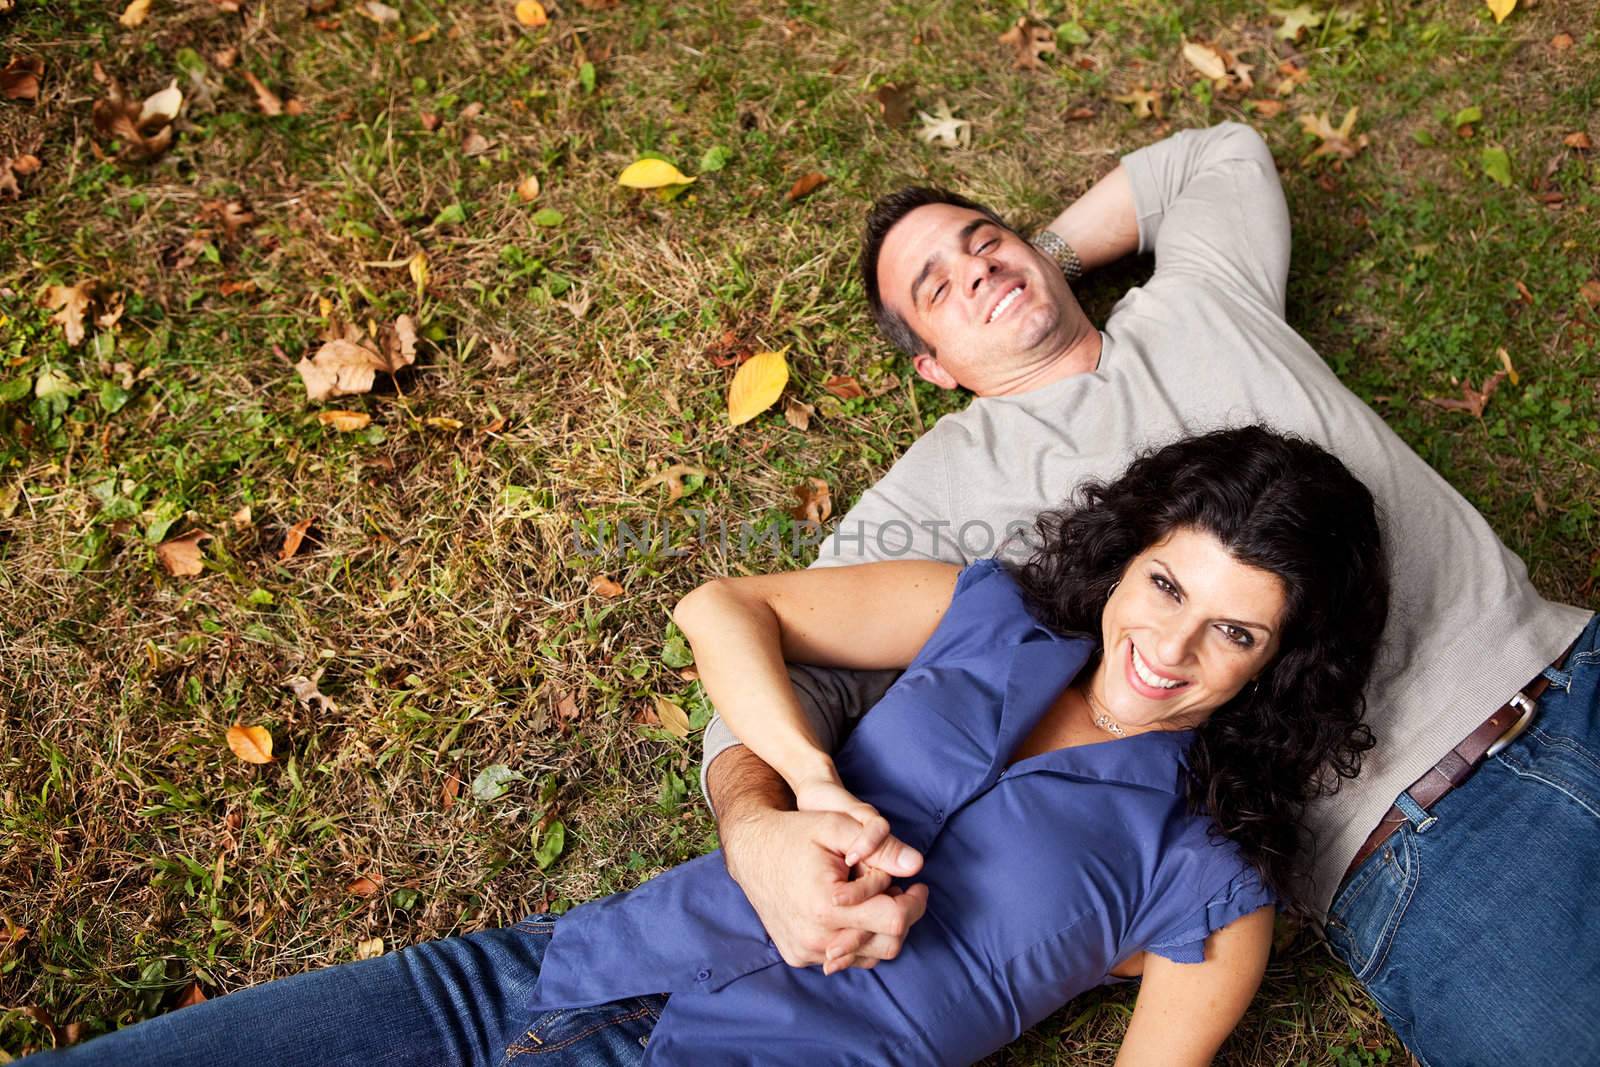 A happy couple daydreaming in a park on grass - sharp focus on woman